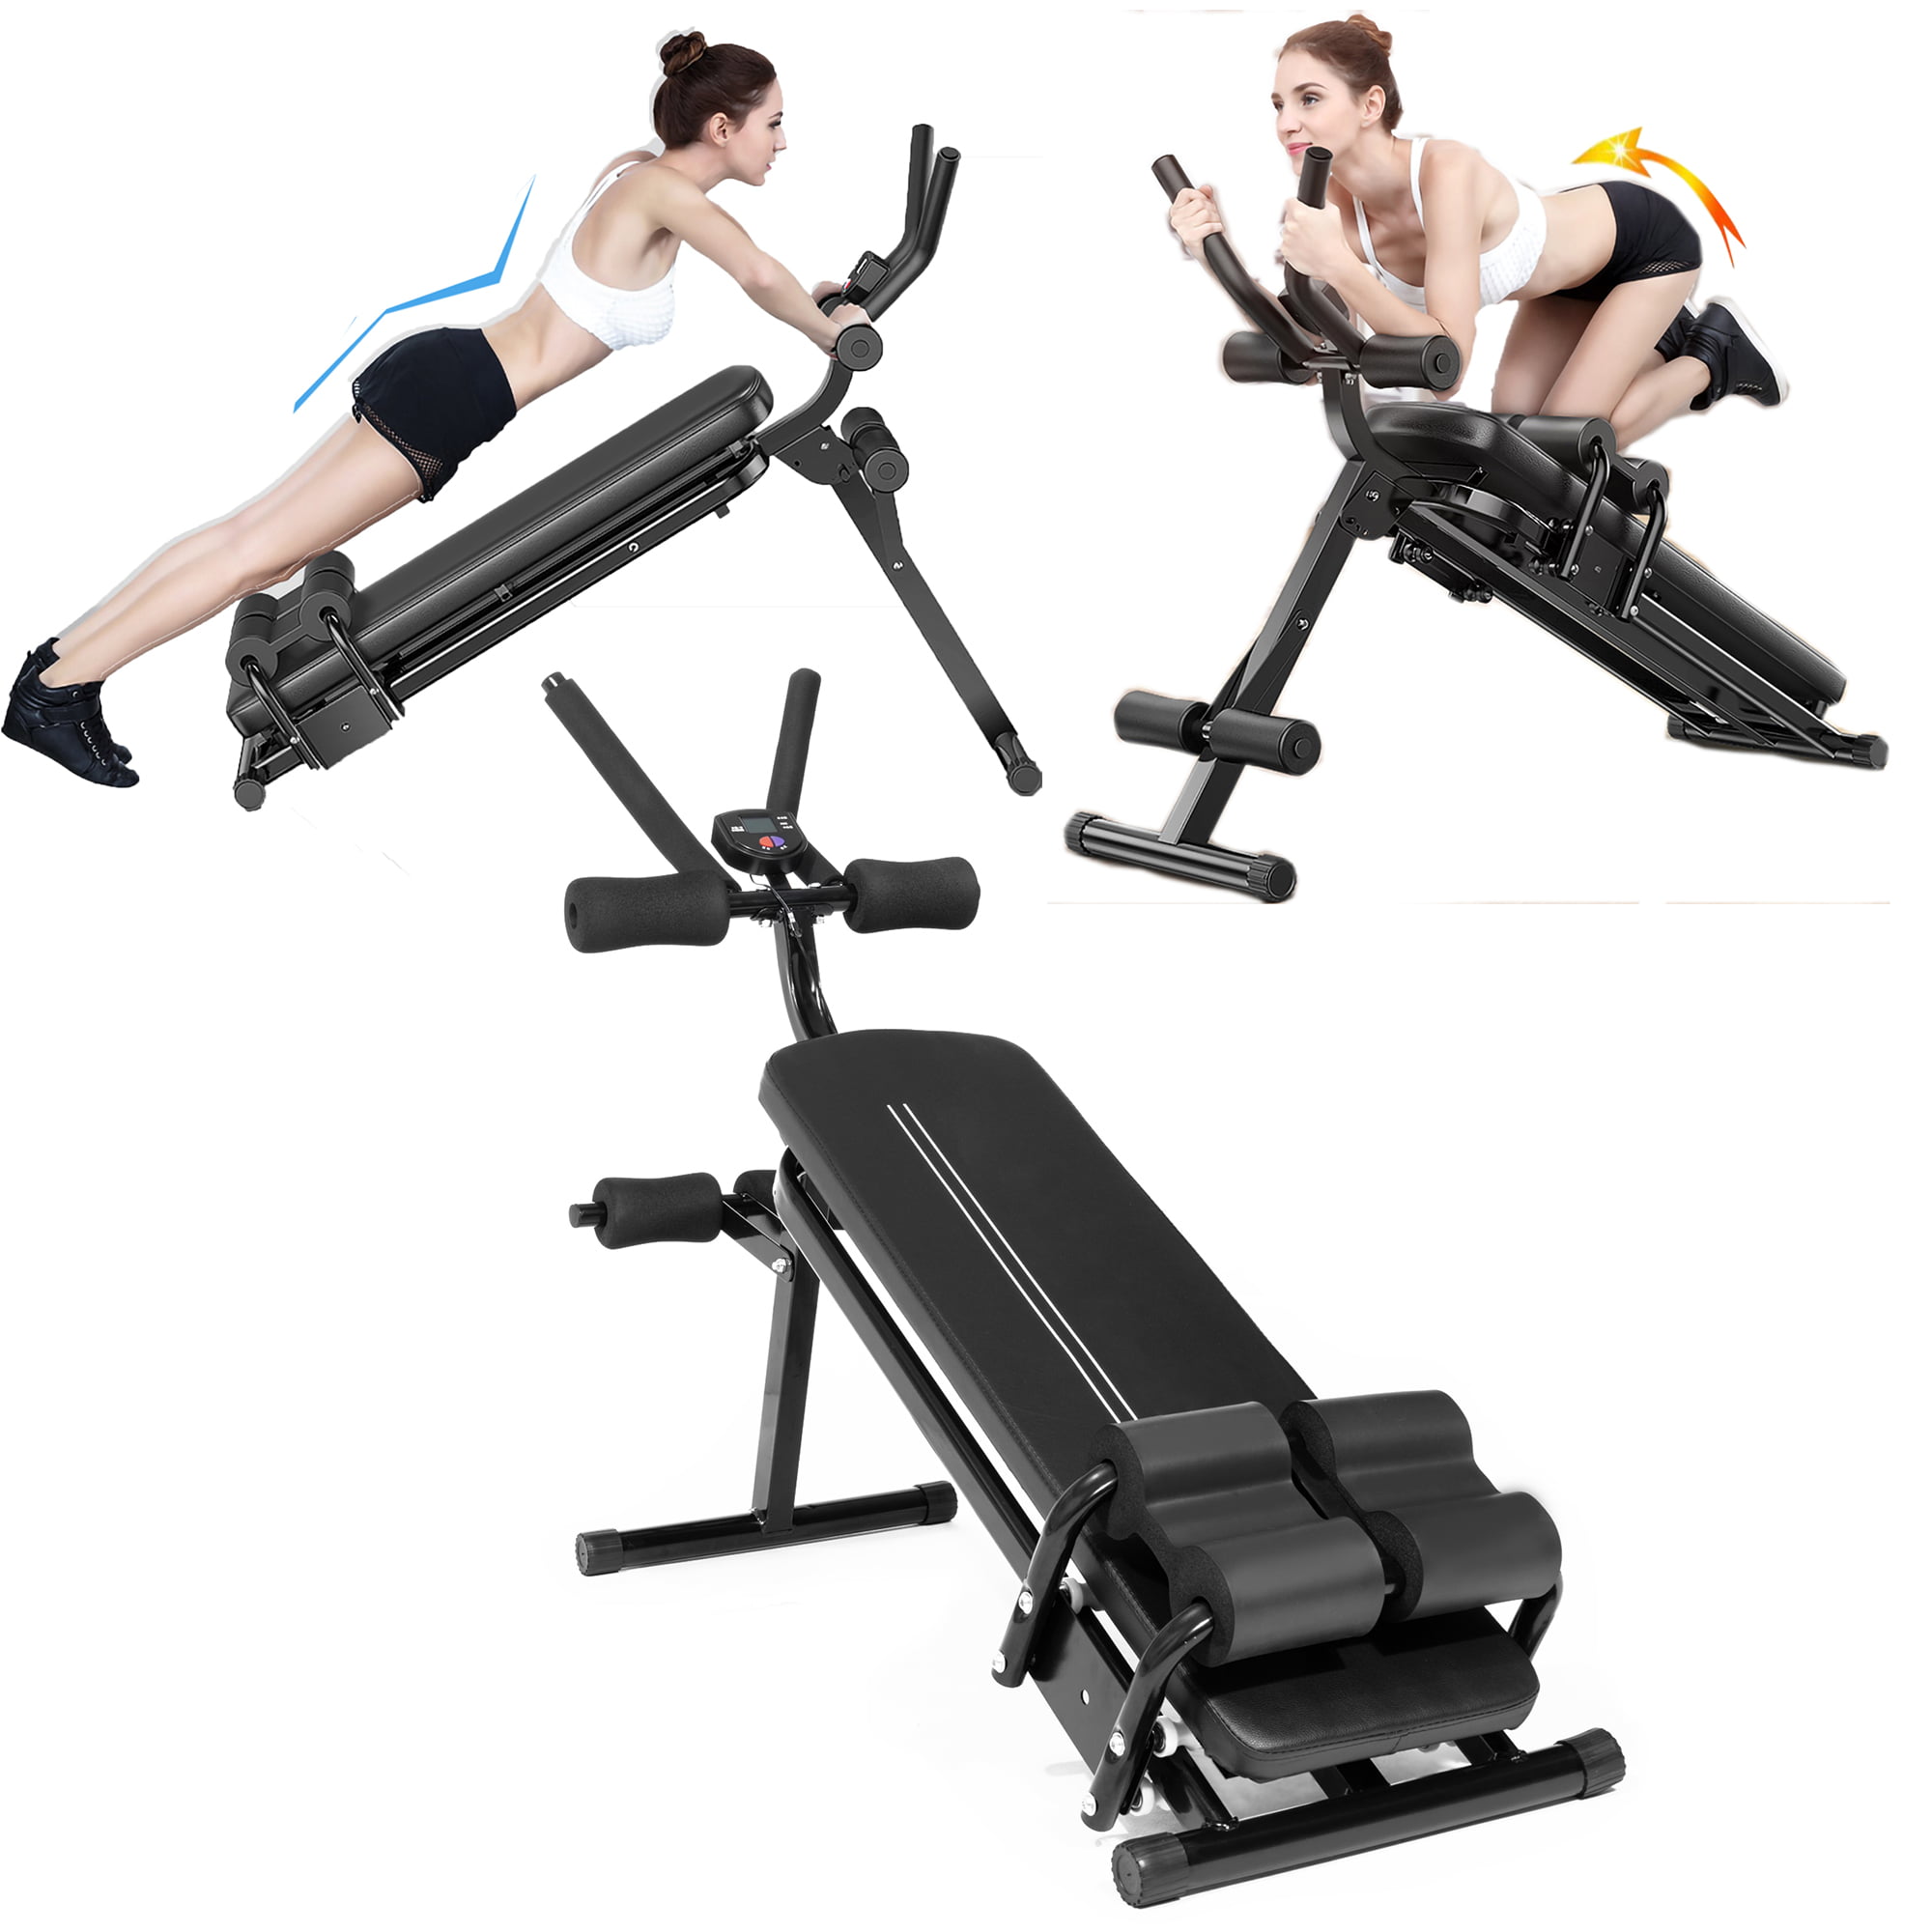 Foldable Adjustable Sit Up Abdominal Bench Press Weight Gym Ab Exercise Fitness 